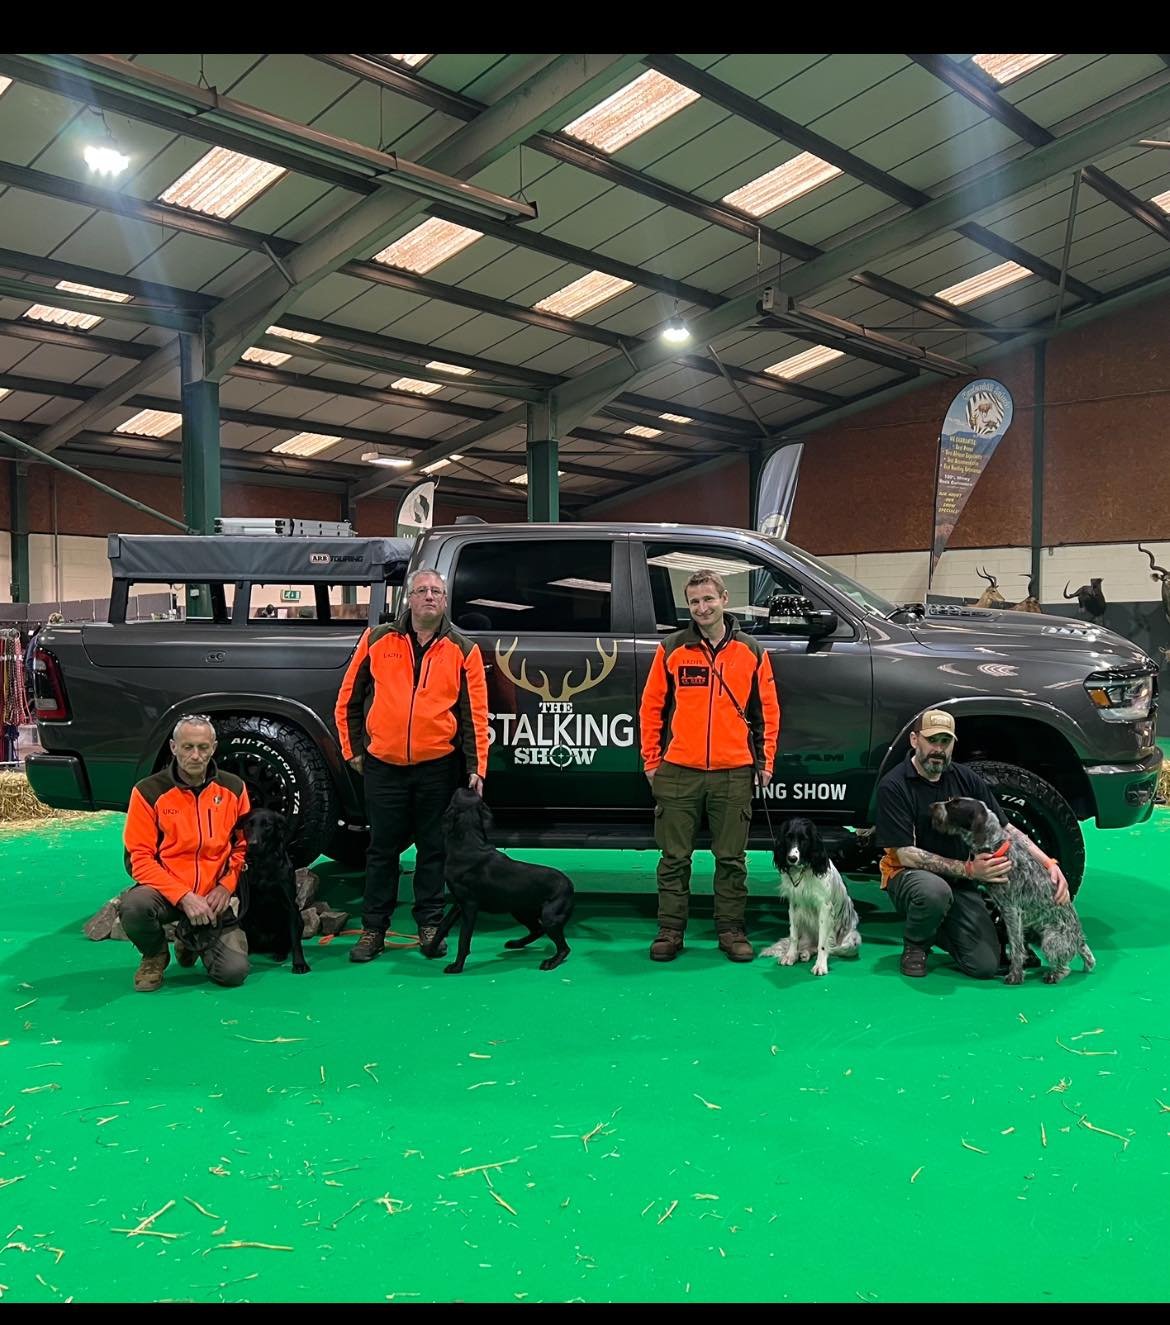 If you&rsquo;re heading out to the The Stalking Show this weekend ..
Look out for Team Orange 
There will UKDTR volunteer tracking teams from all over the country present all weekend..
Either stop them for a chat as you see them wandering around the 